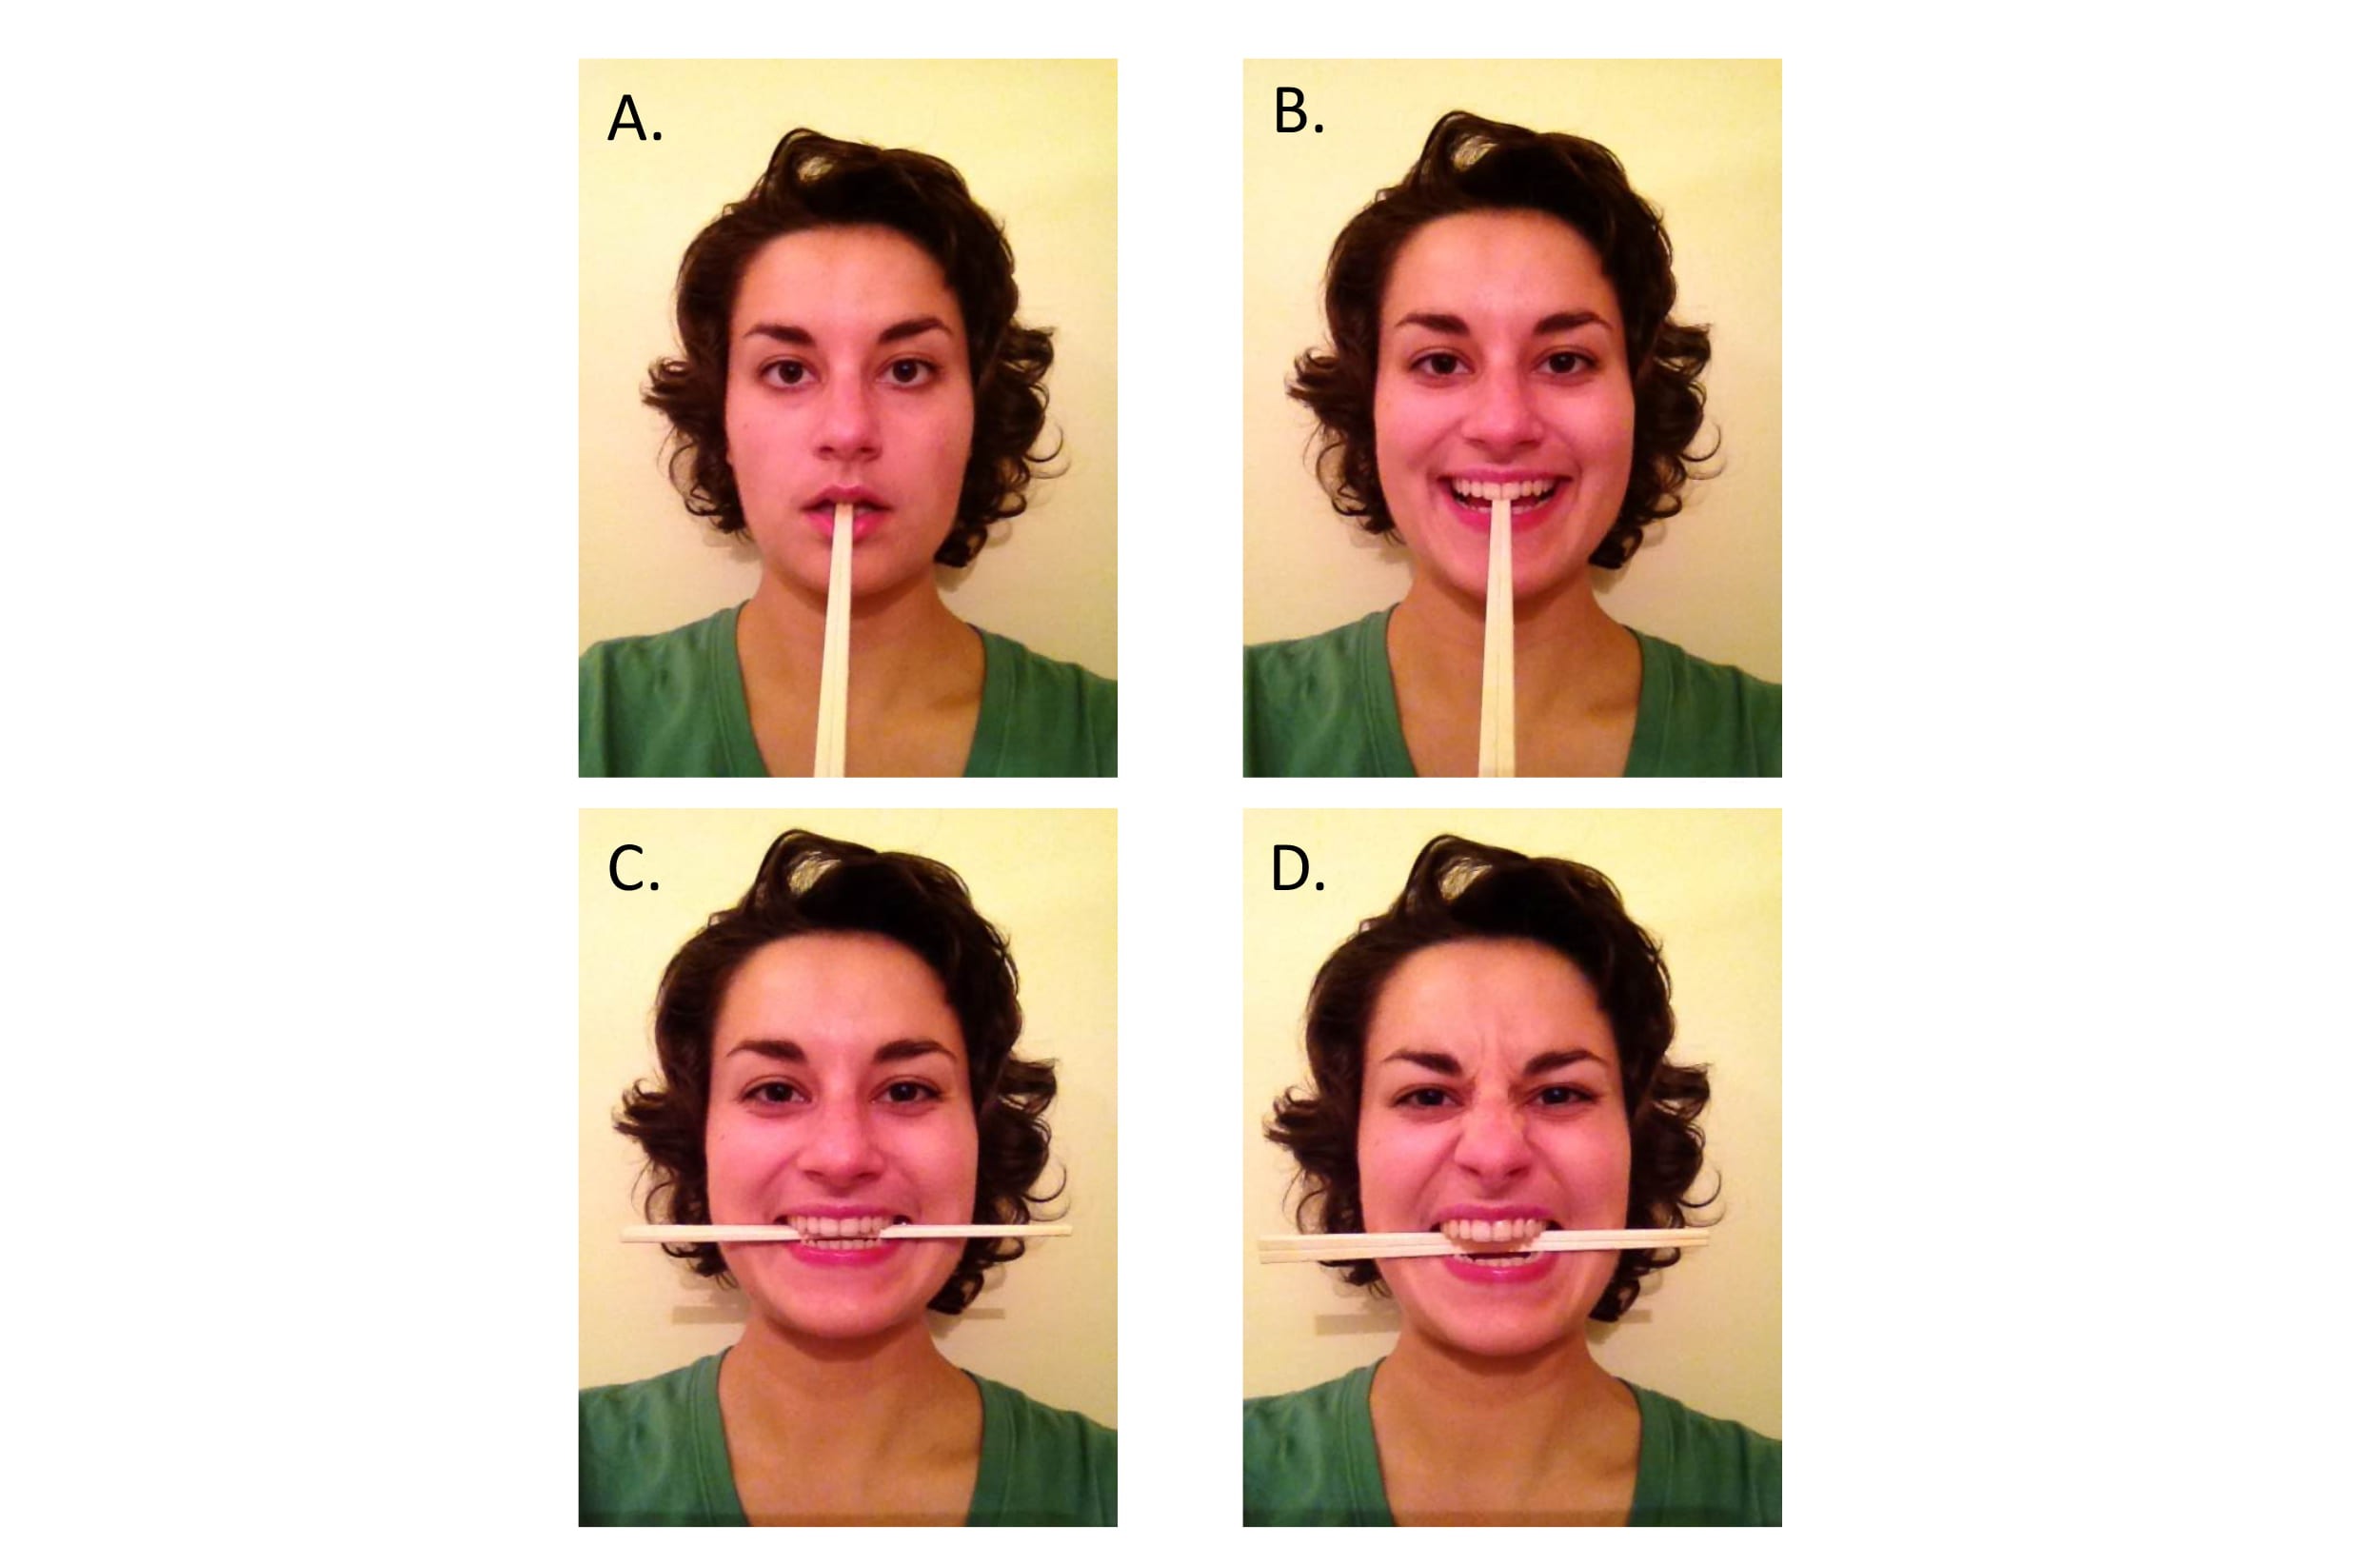 Chopsticks were used in the study to help subjects hold one of four facial expressions: A. neutral, B. non-Duchenne smile, C. Duchenne smile and D. grimace.